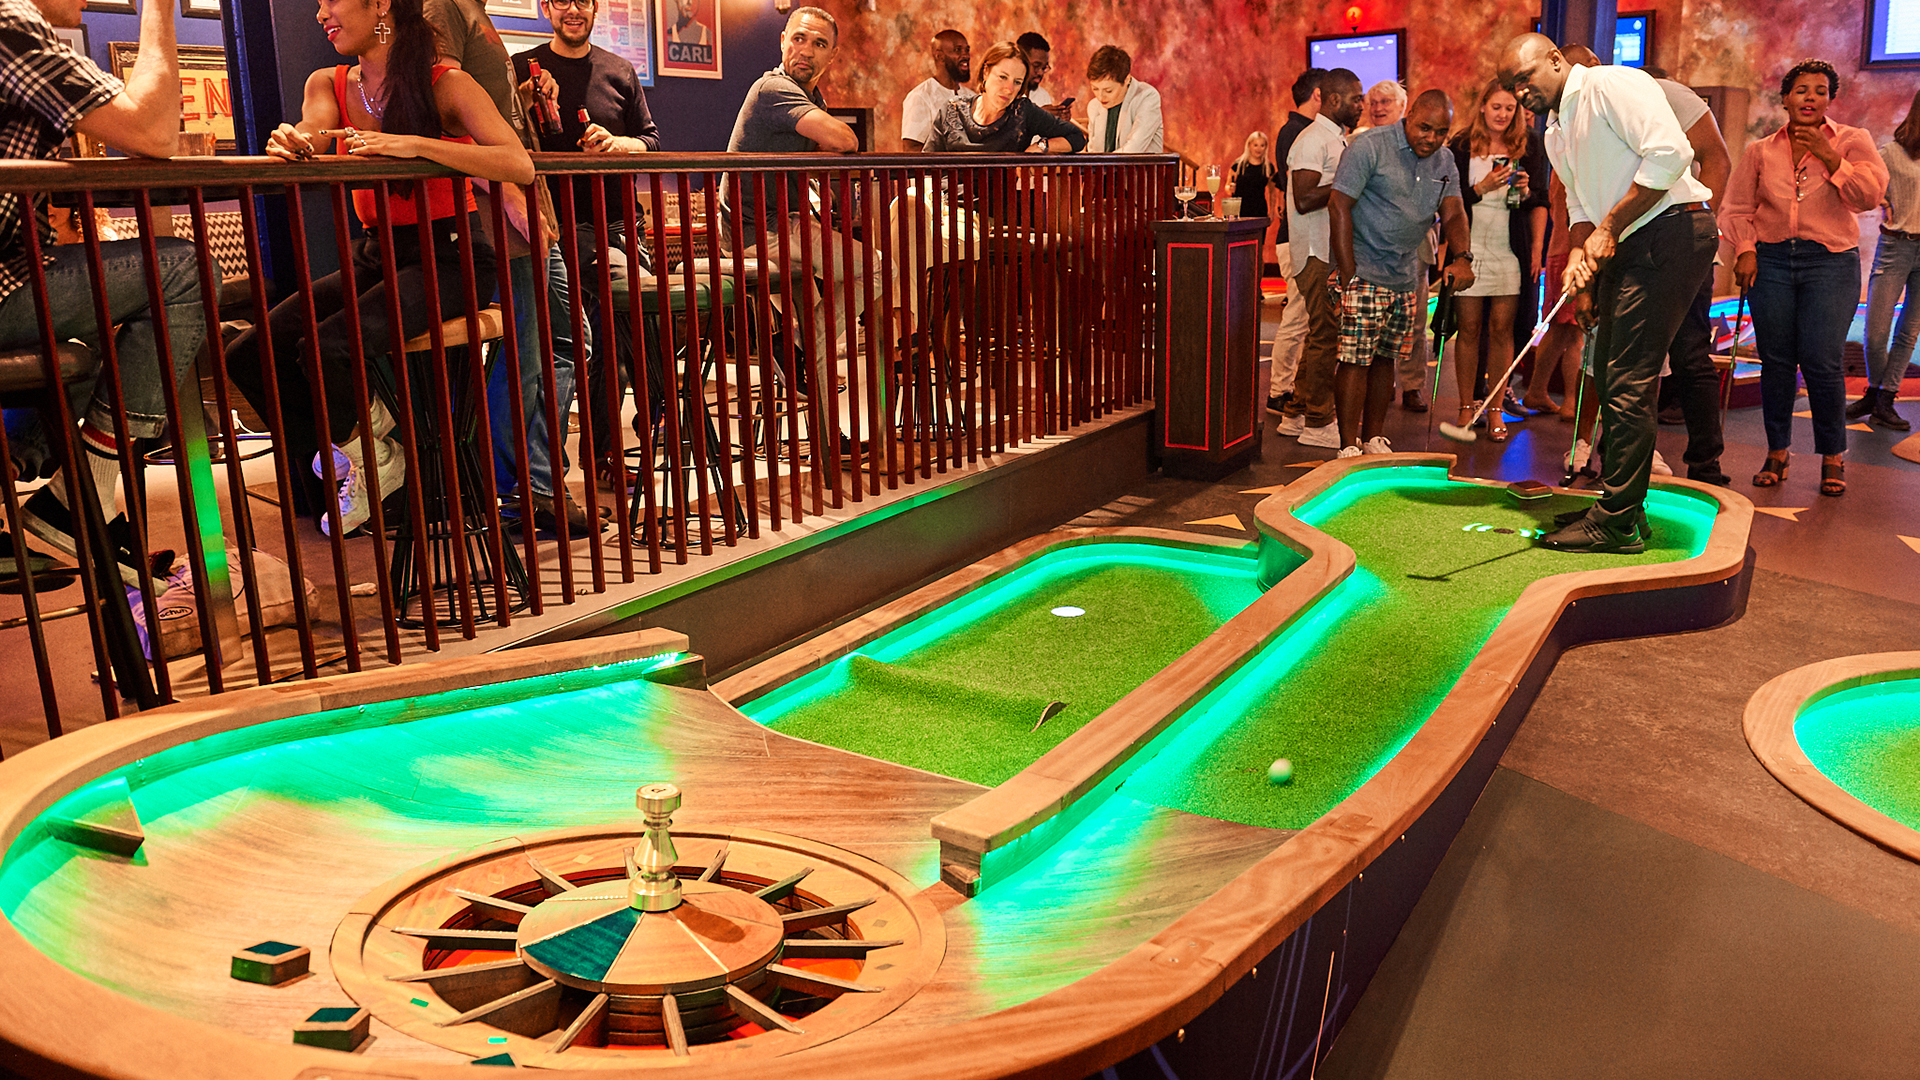 A man takes a putt on one of Puttshack's brightly lit mini golf holes, while people look on.